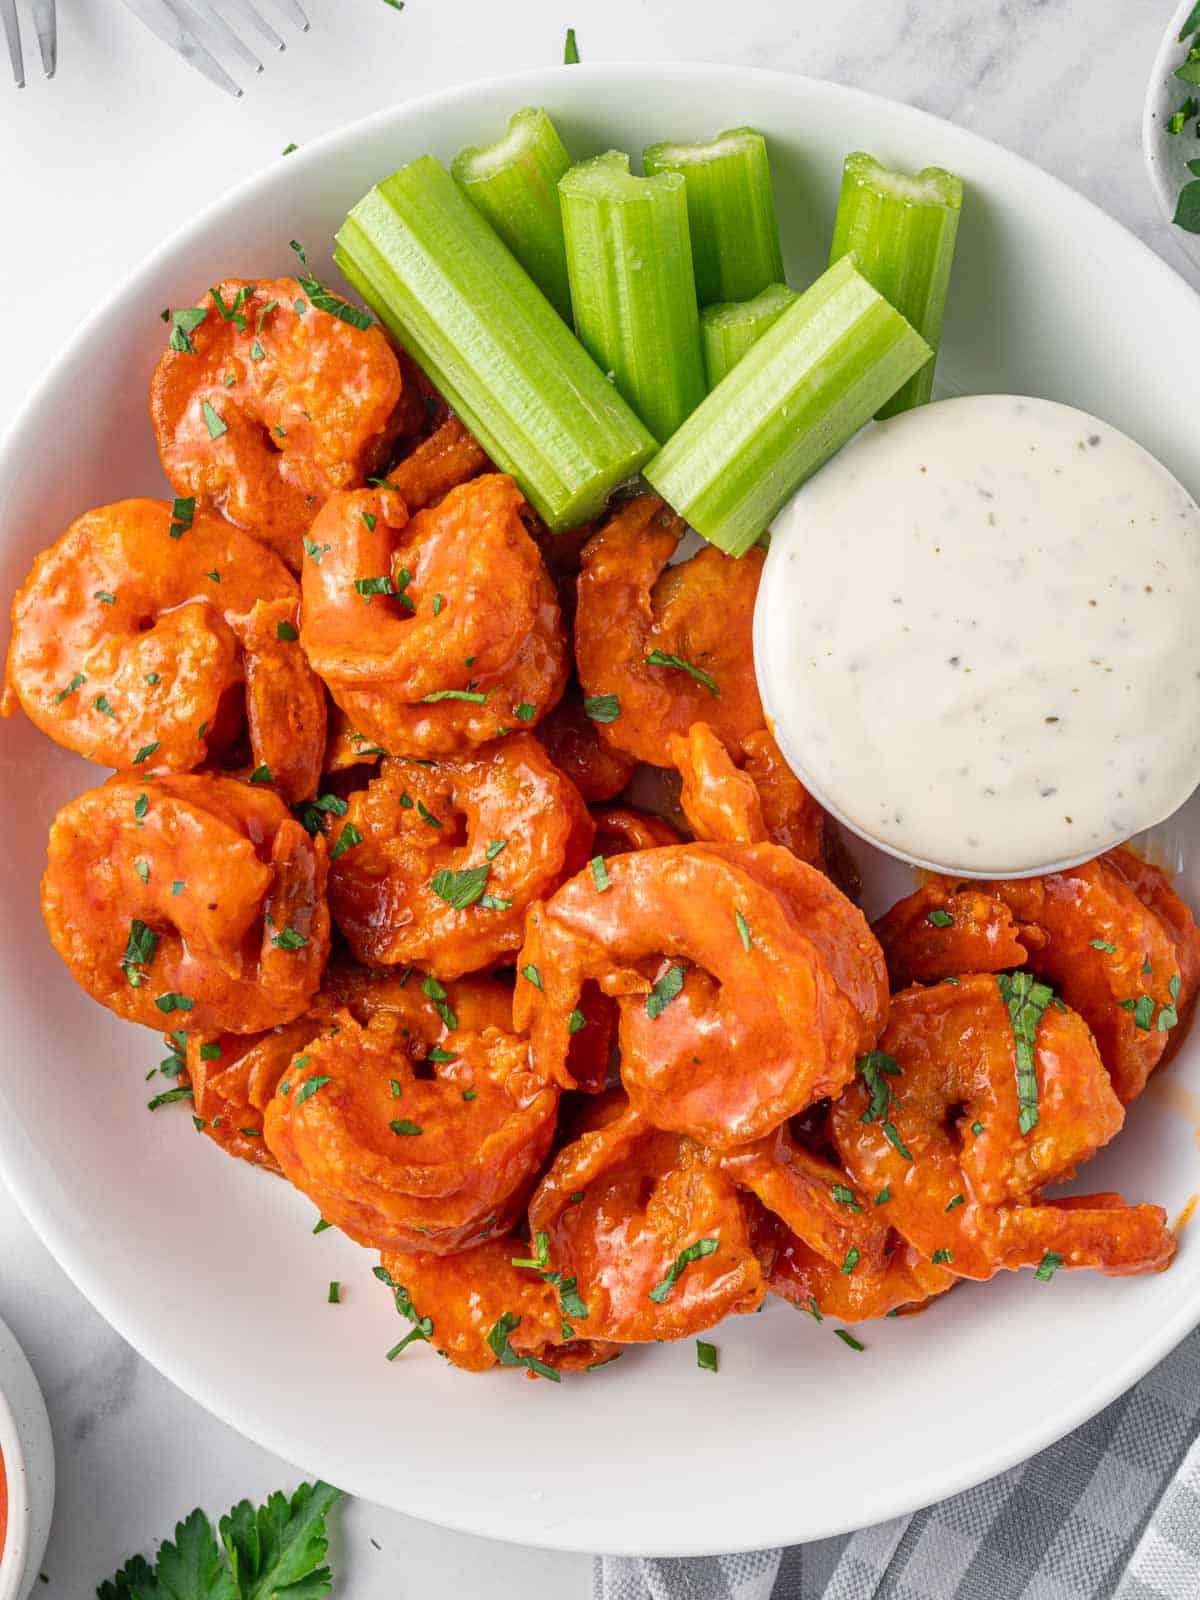 A plate of spicy fried shrimp and creamy dressing.